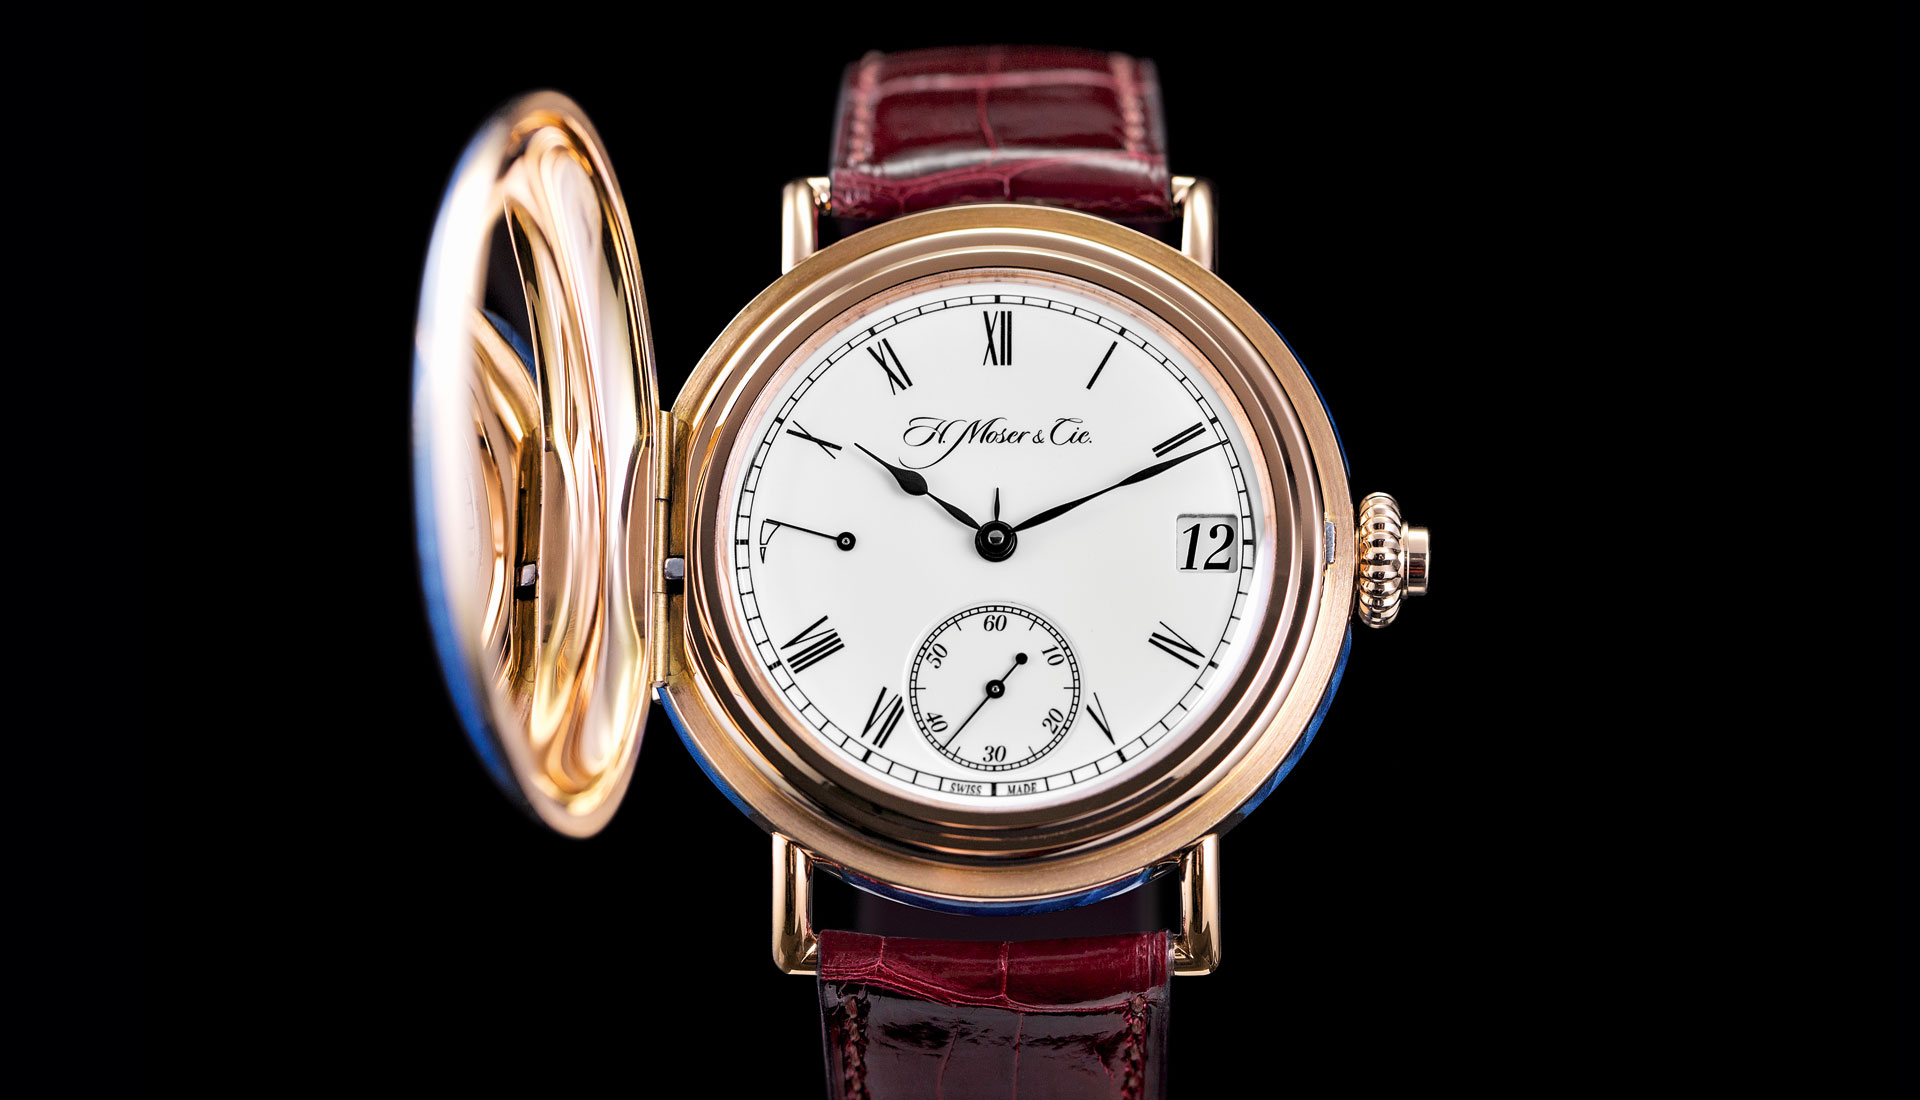 H. Moser & Cie. - Perpetual Calendar Heritage Limited Edition